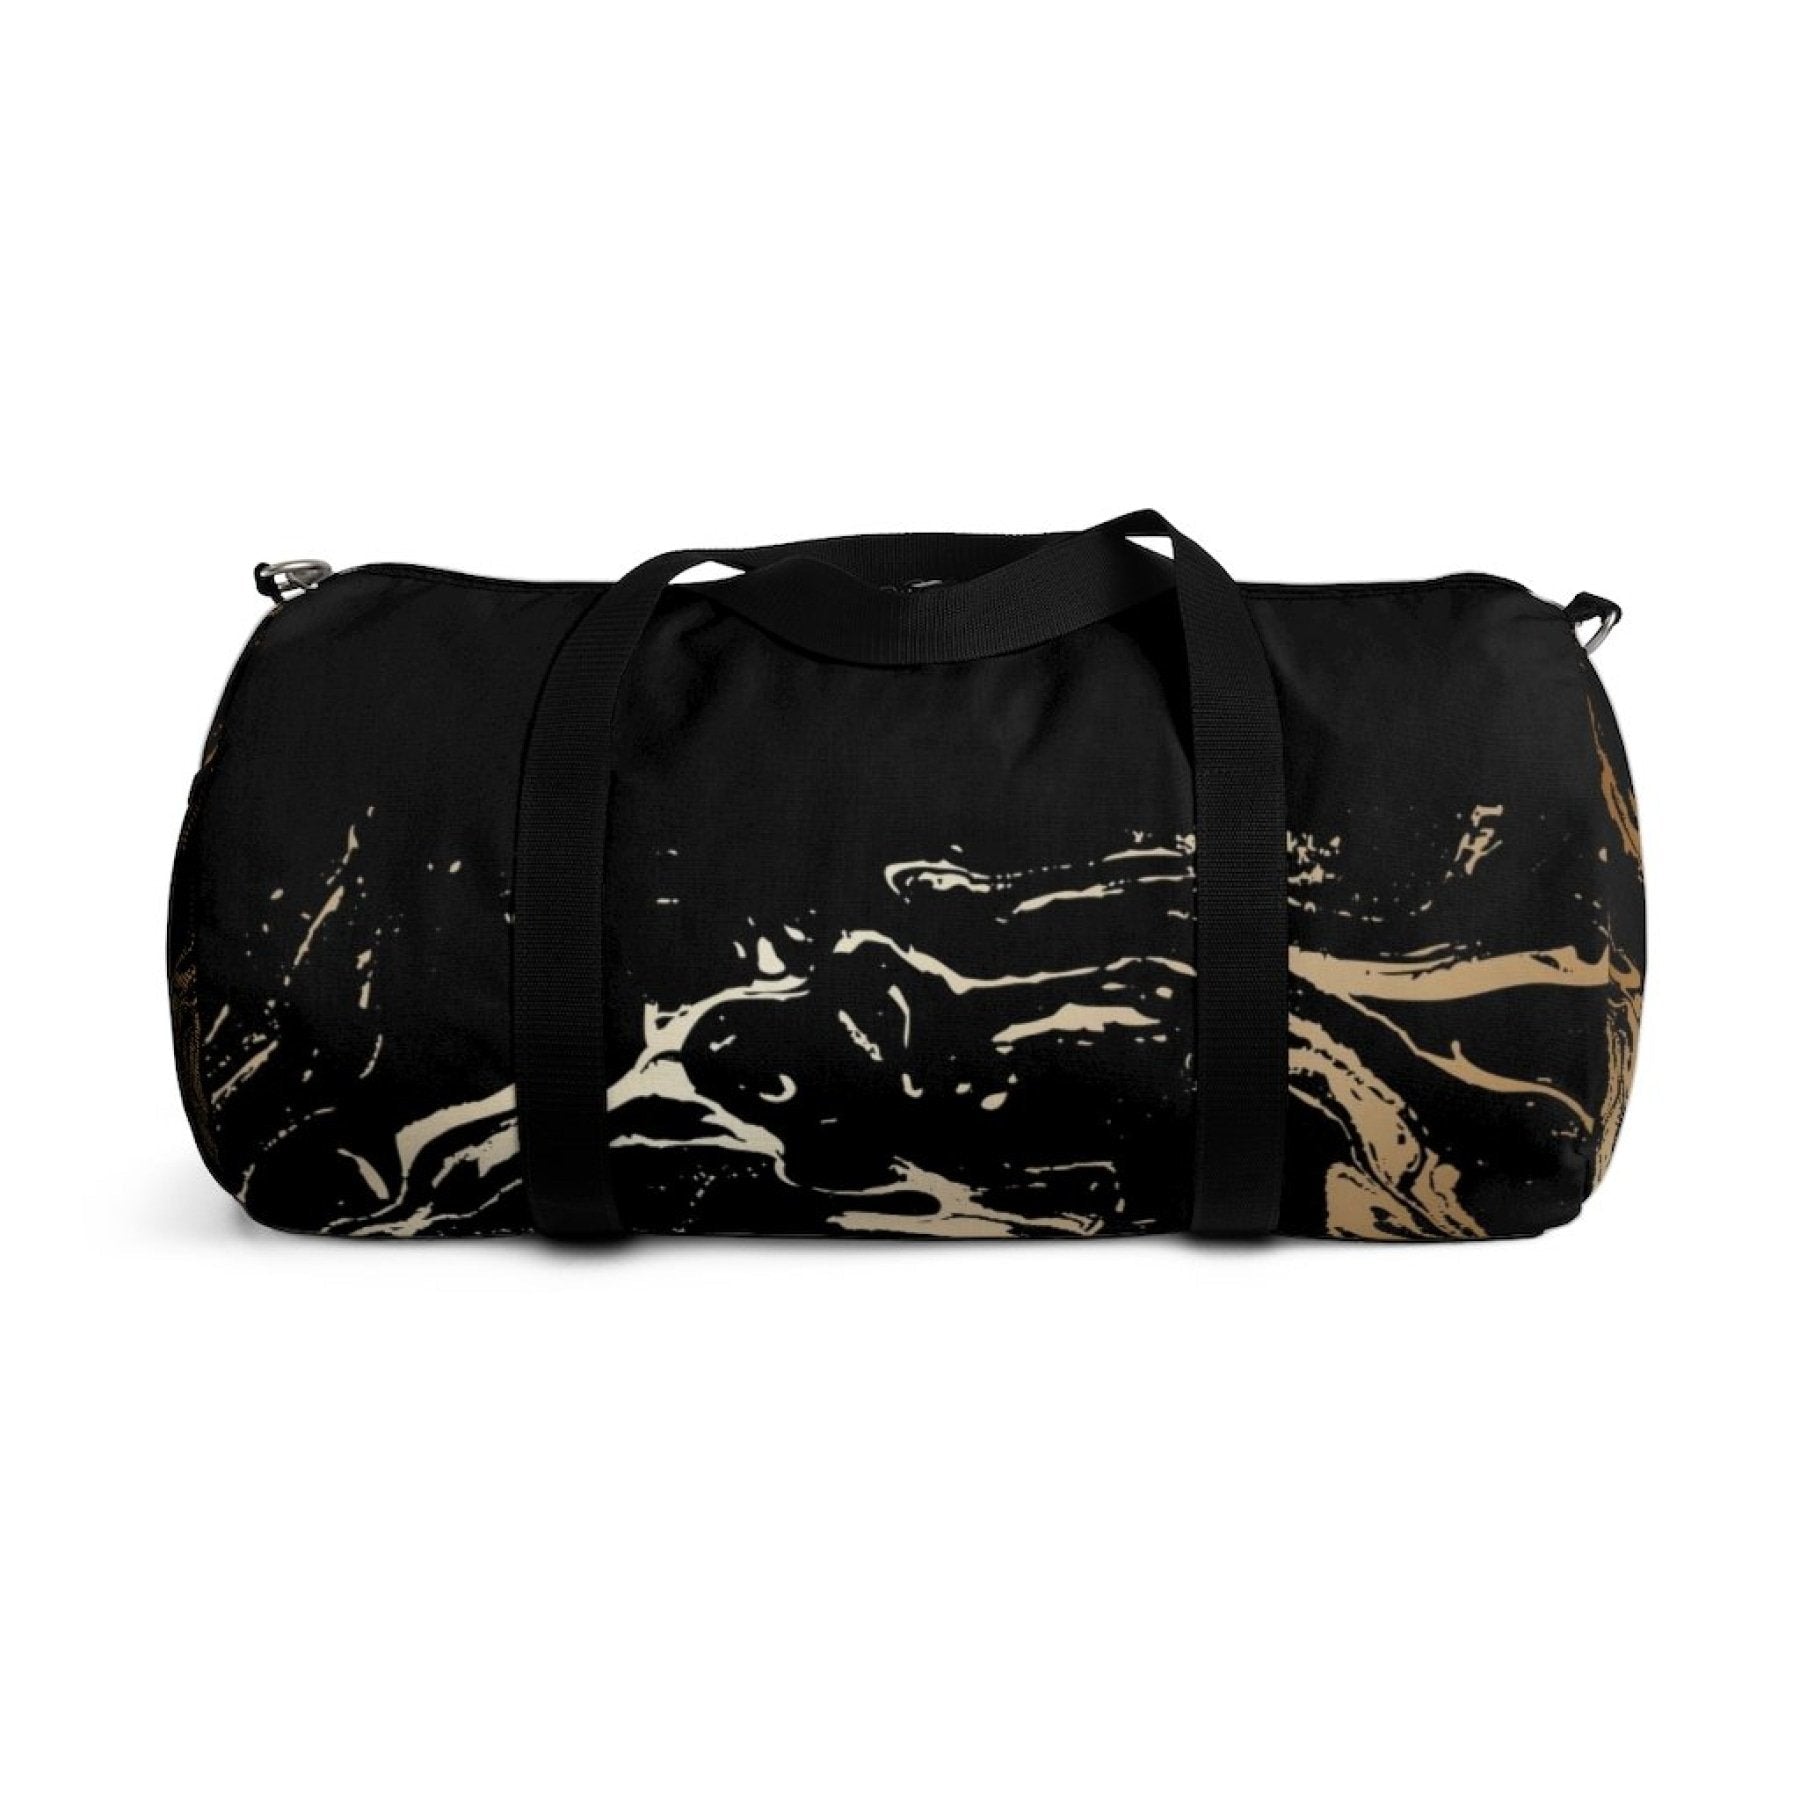 Duffel Bag Carry On Luggage / Black and Gold - Uniquely You - KME means the very best